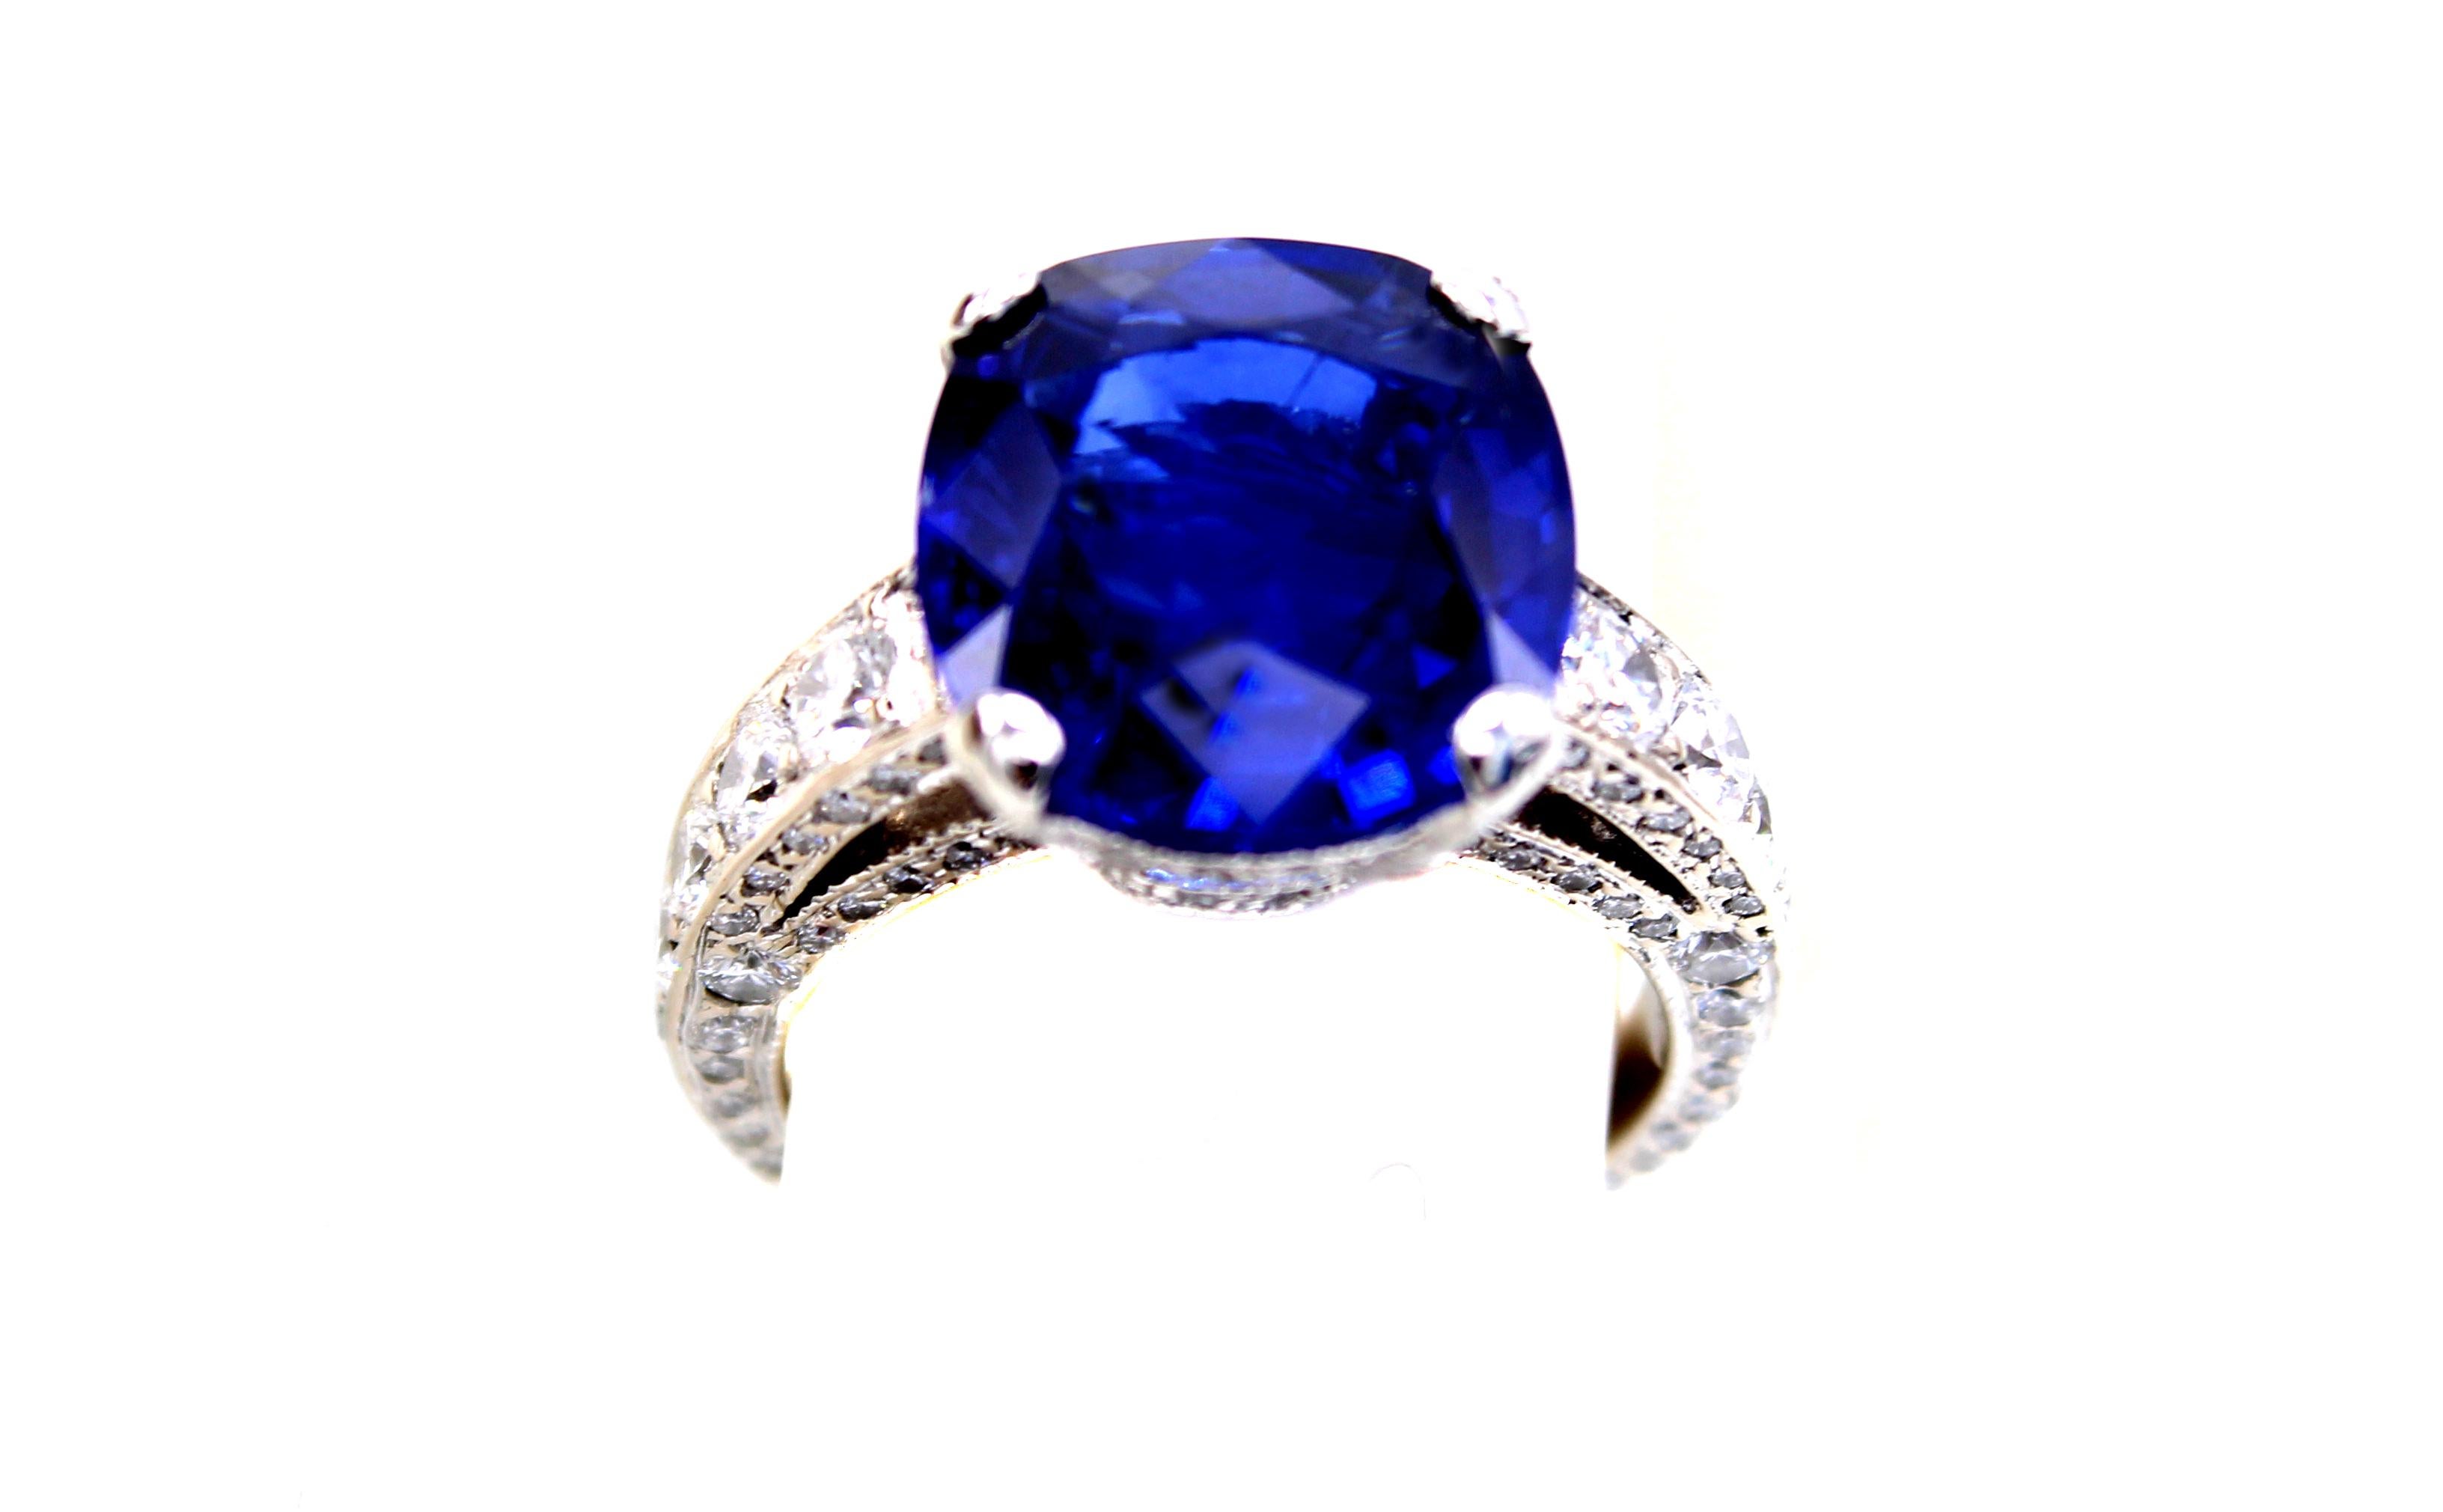 A perfectly cut Burma No Heat cushion is the center piece of this exquisite ring by the renown London jeweler Laurence Graff. The 6.61 carat Burmese sapphire is accompanied by a report from AGL stating the origin as Burma and enhancement as none. 